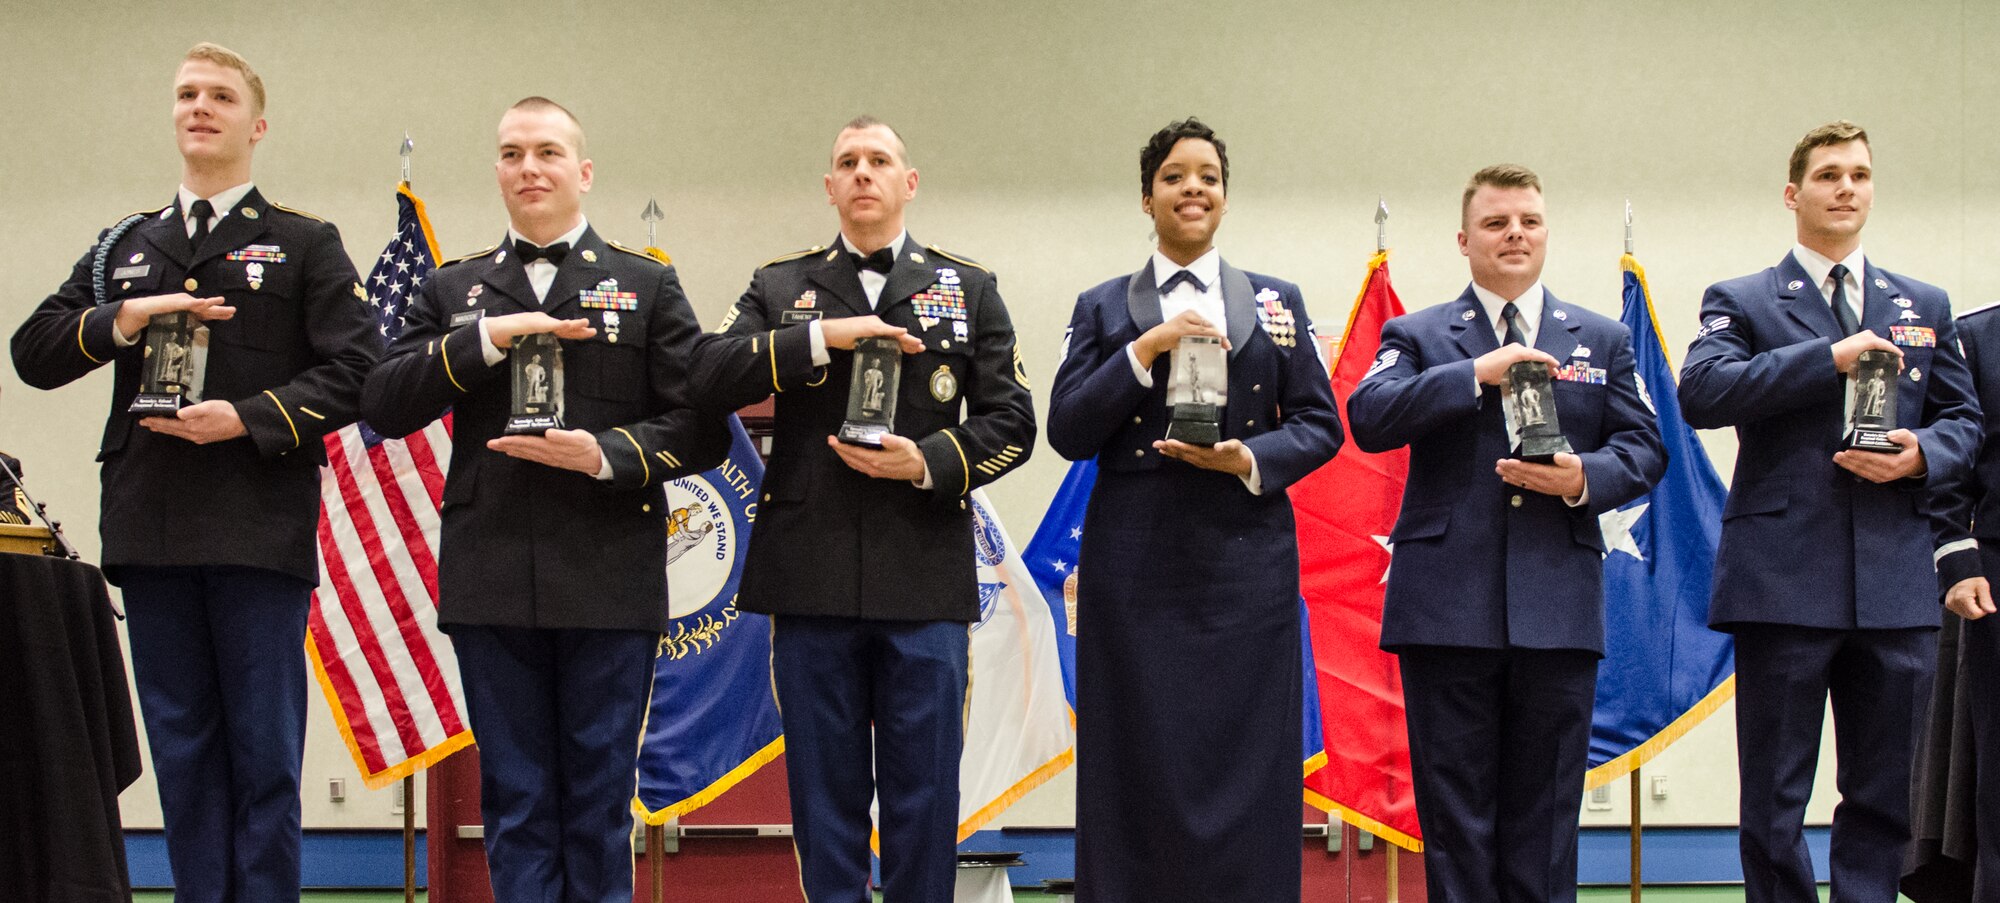 The Kentucky National Guard honored its Outstanding Soldiers and Airmen of the Year during a banquet held at the Kentucky Fair and Exposition Center in Louisville, Ky., March 14, 2105. Pictured from left to right are Army Spc. Christopher Jones, Army Staff Sgt. Jesse Mascoe, Army Sgt. 1st Class Jay Taheny, Air Force Master Sgt. Zakiya Taylor, Air Force Tech. Sgt. Don Yeats and Air Force Senior Airman William Willging. (U.S. Air National Guard photo by Senior Airman Joshua Horton)